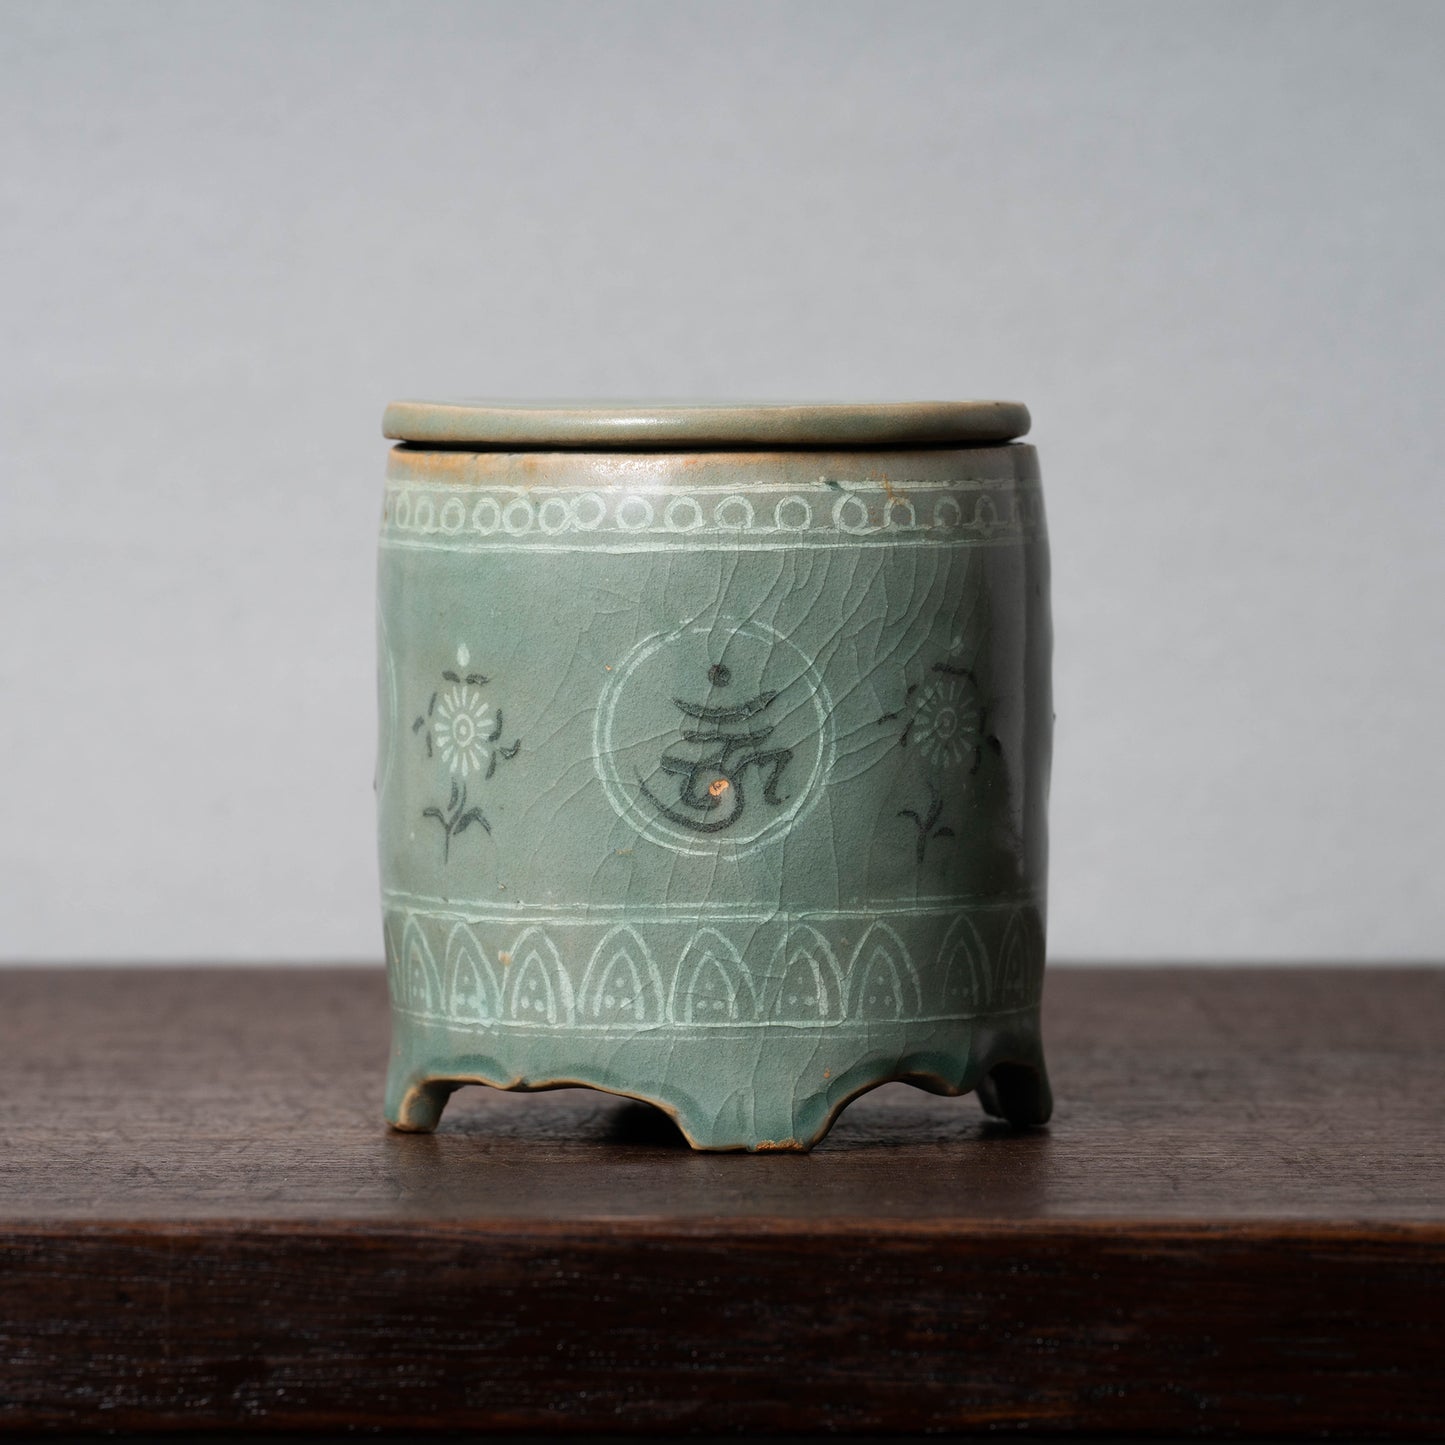 Goryeo Dynasty Celadon Jar and cover with Inlaid Sanskrit Characters